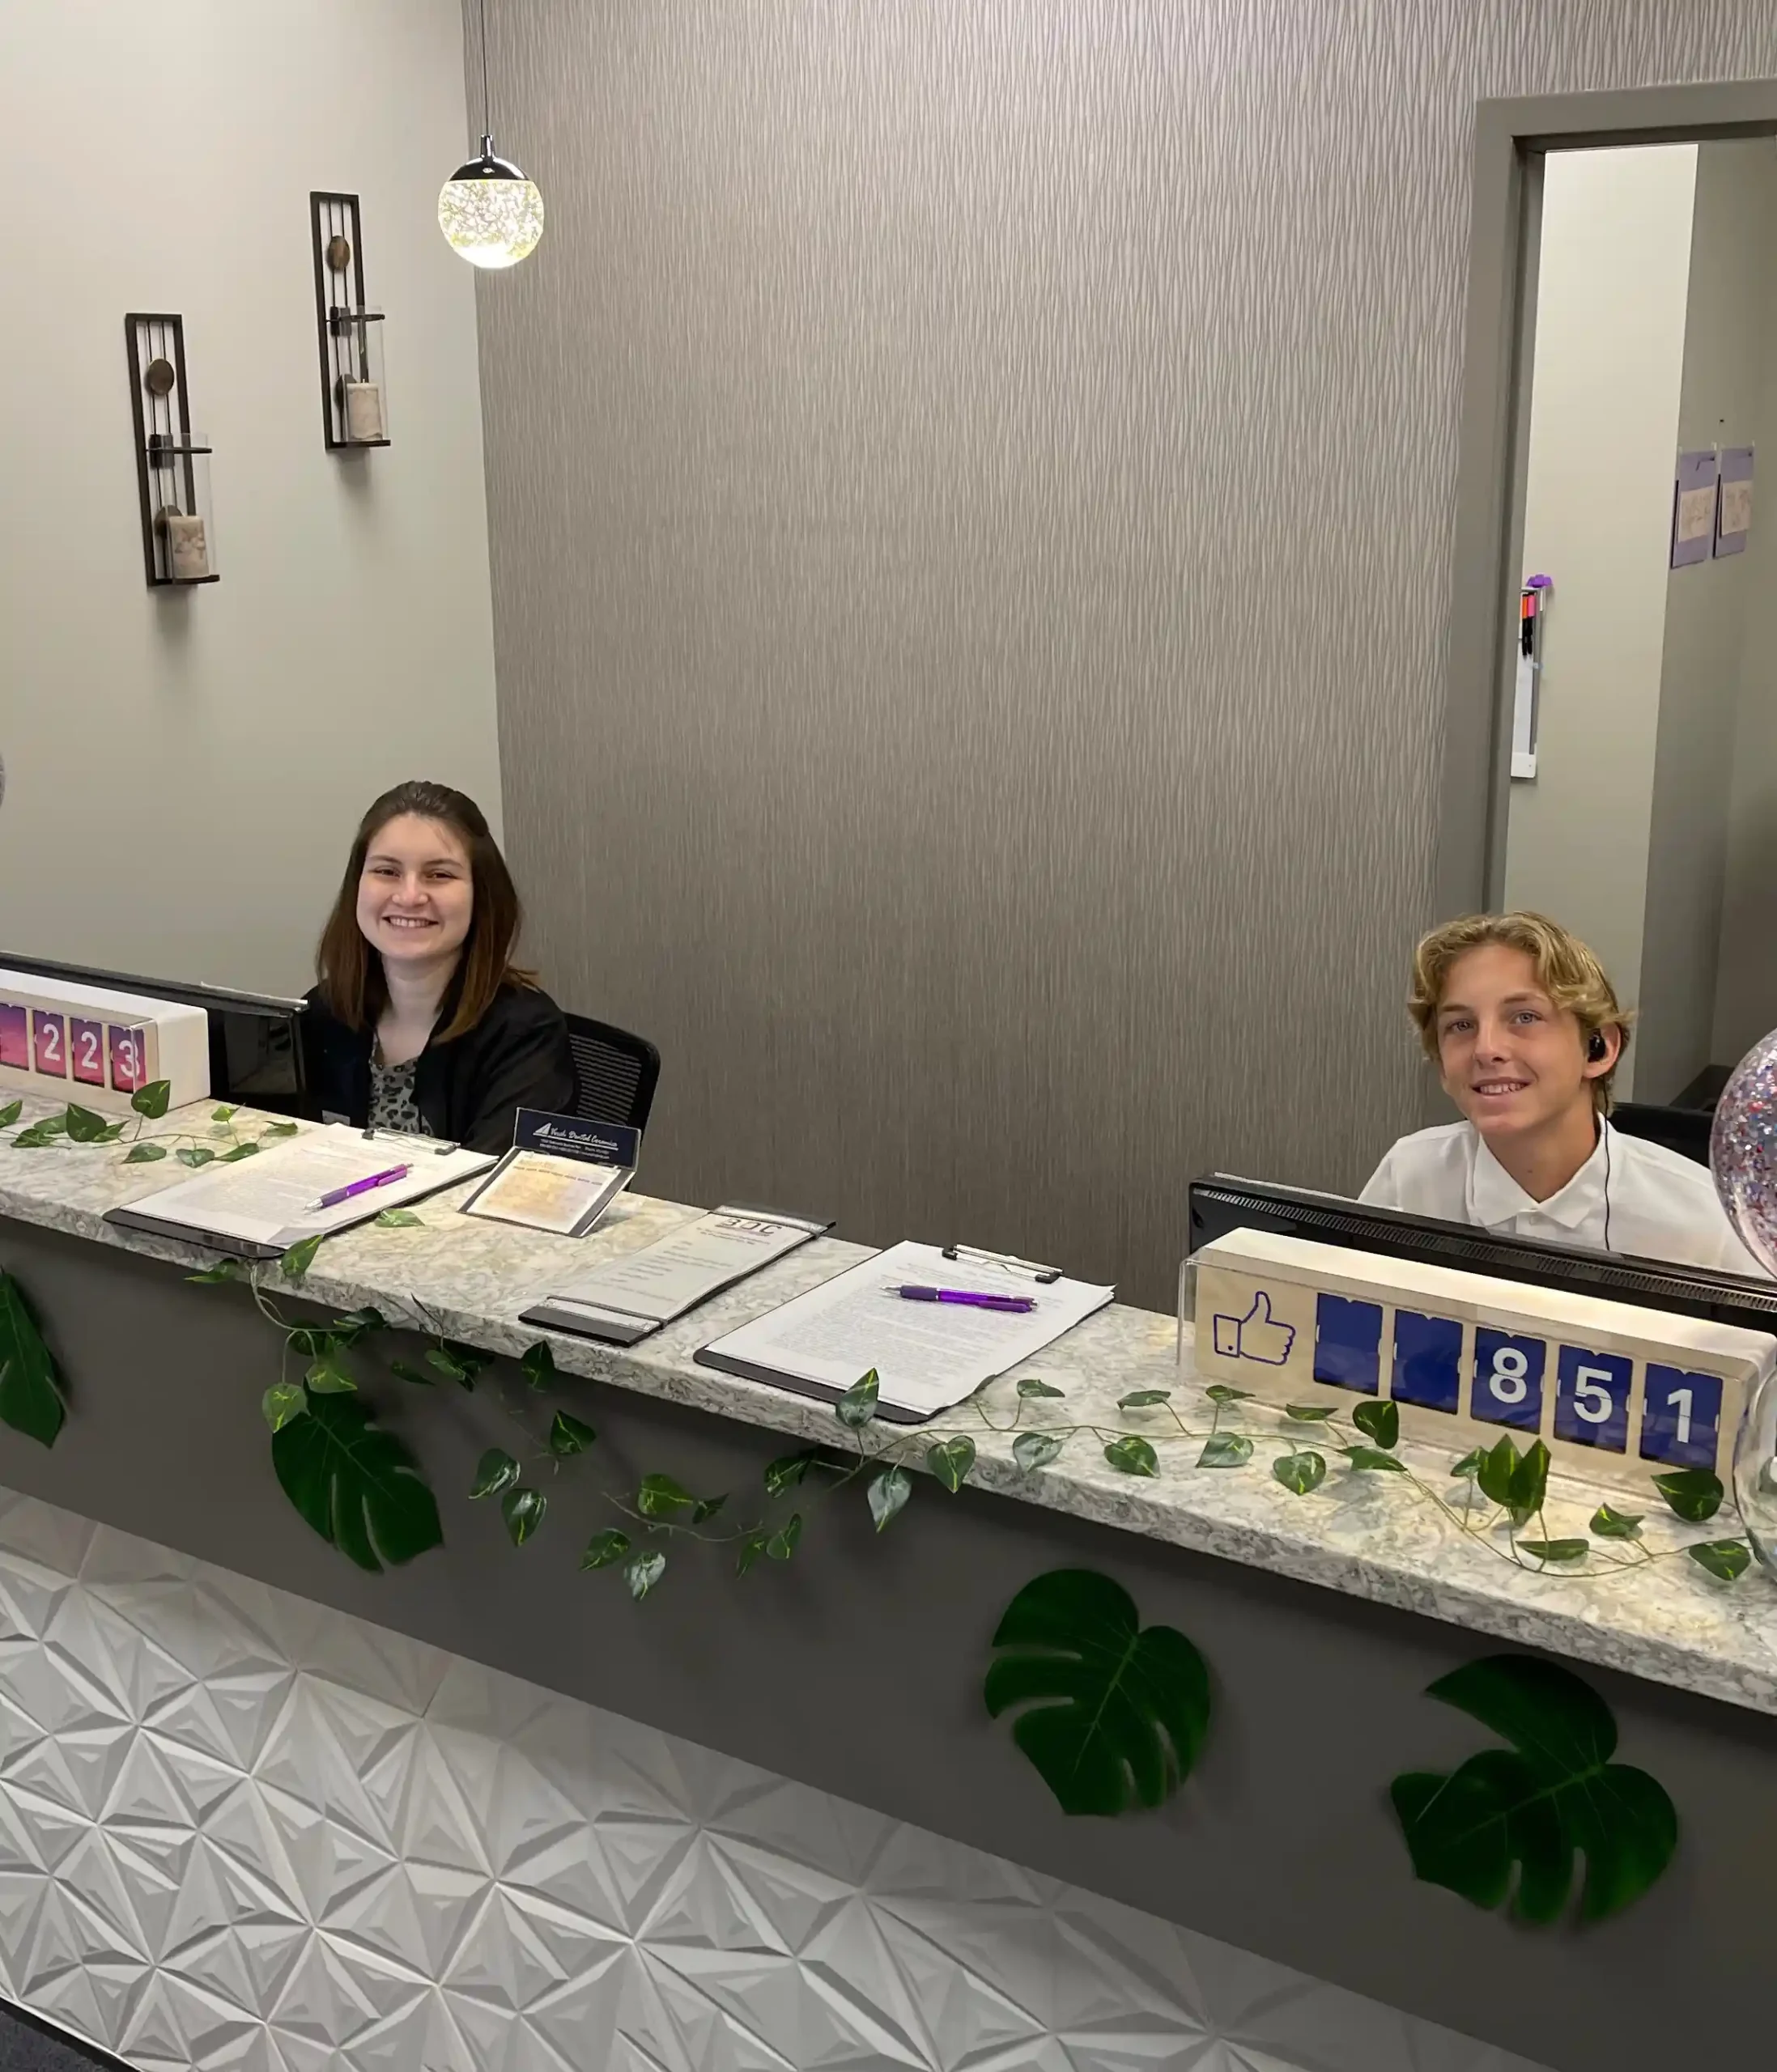 Ballwin Dental Care Team ready to greet at front desk